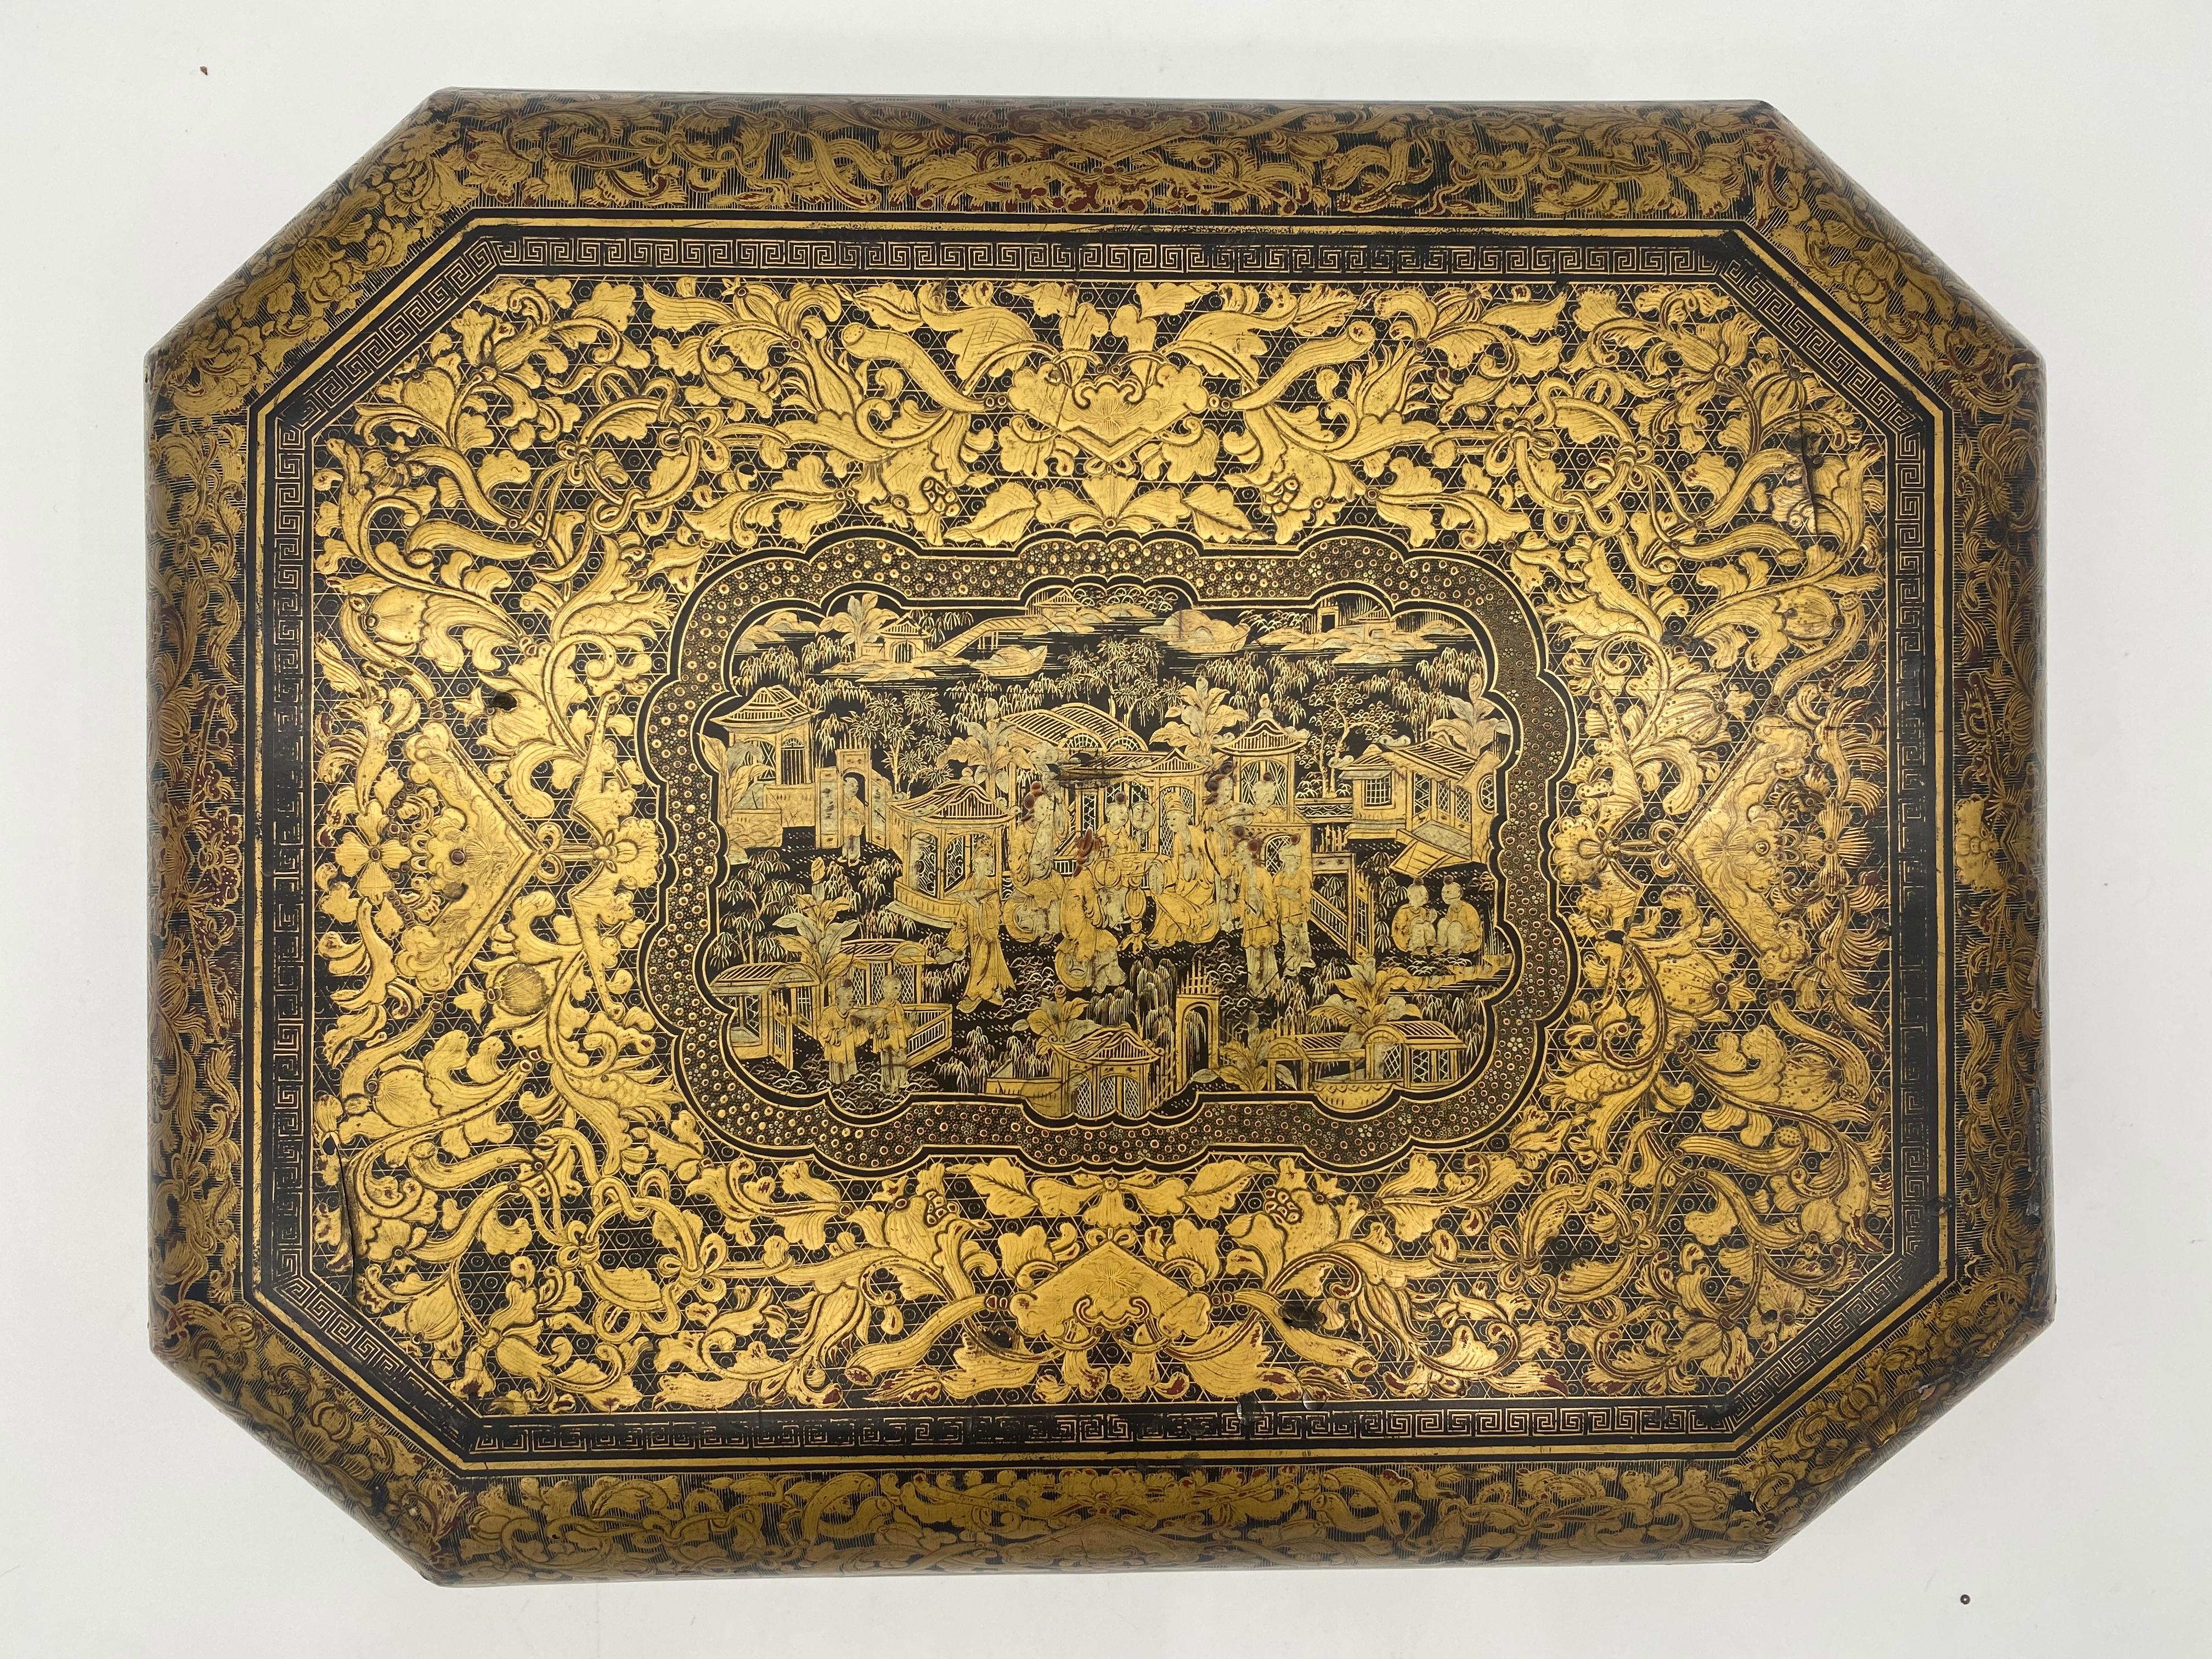 Antique 19th Century Export Chinese Gilt Chinoiserie Lacquer Gaming Box For Sale 5